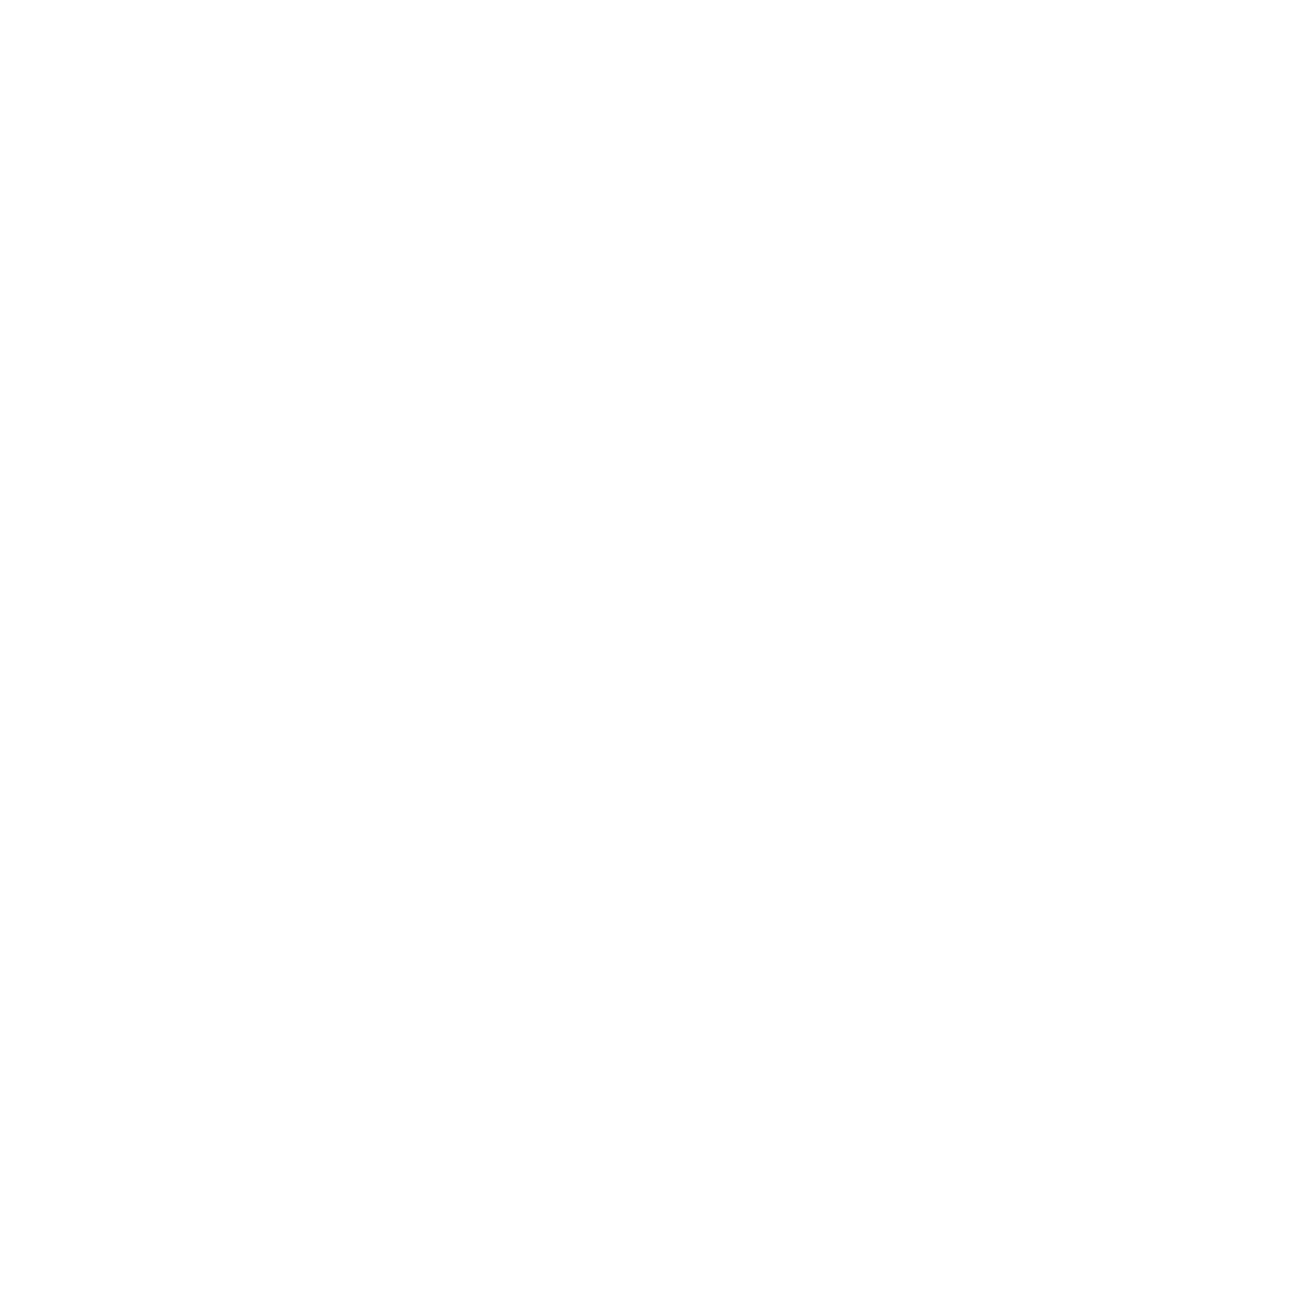 USA Poultry logo stacked white